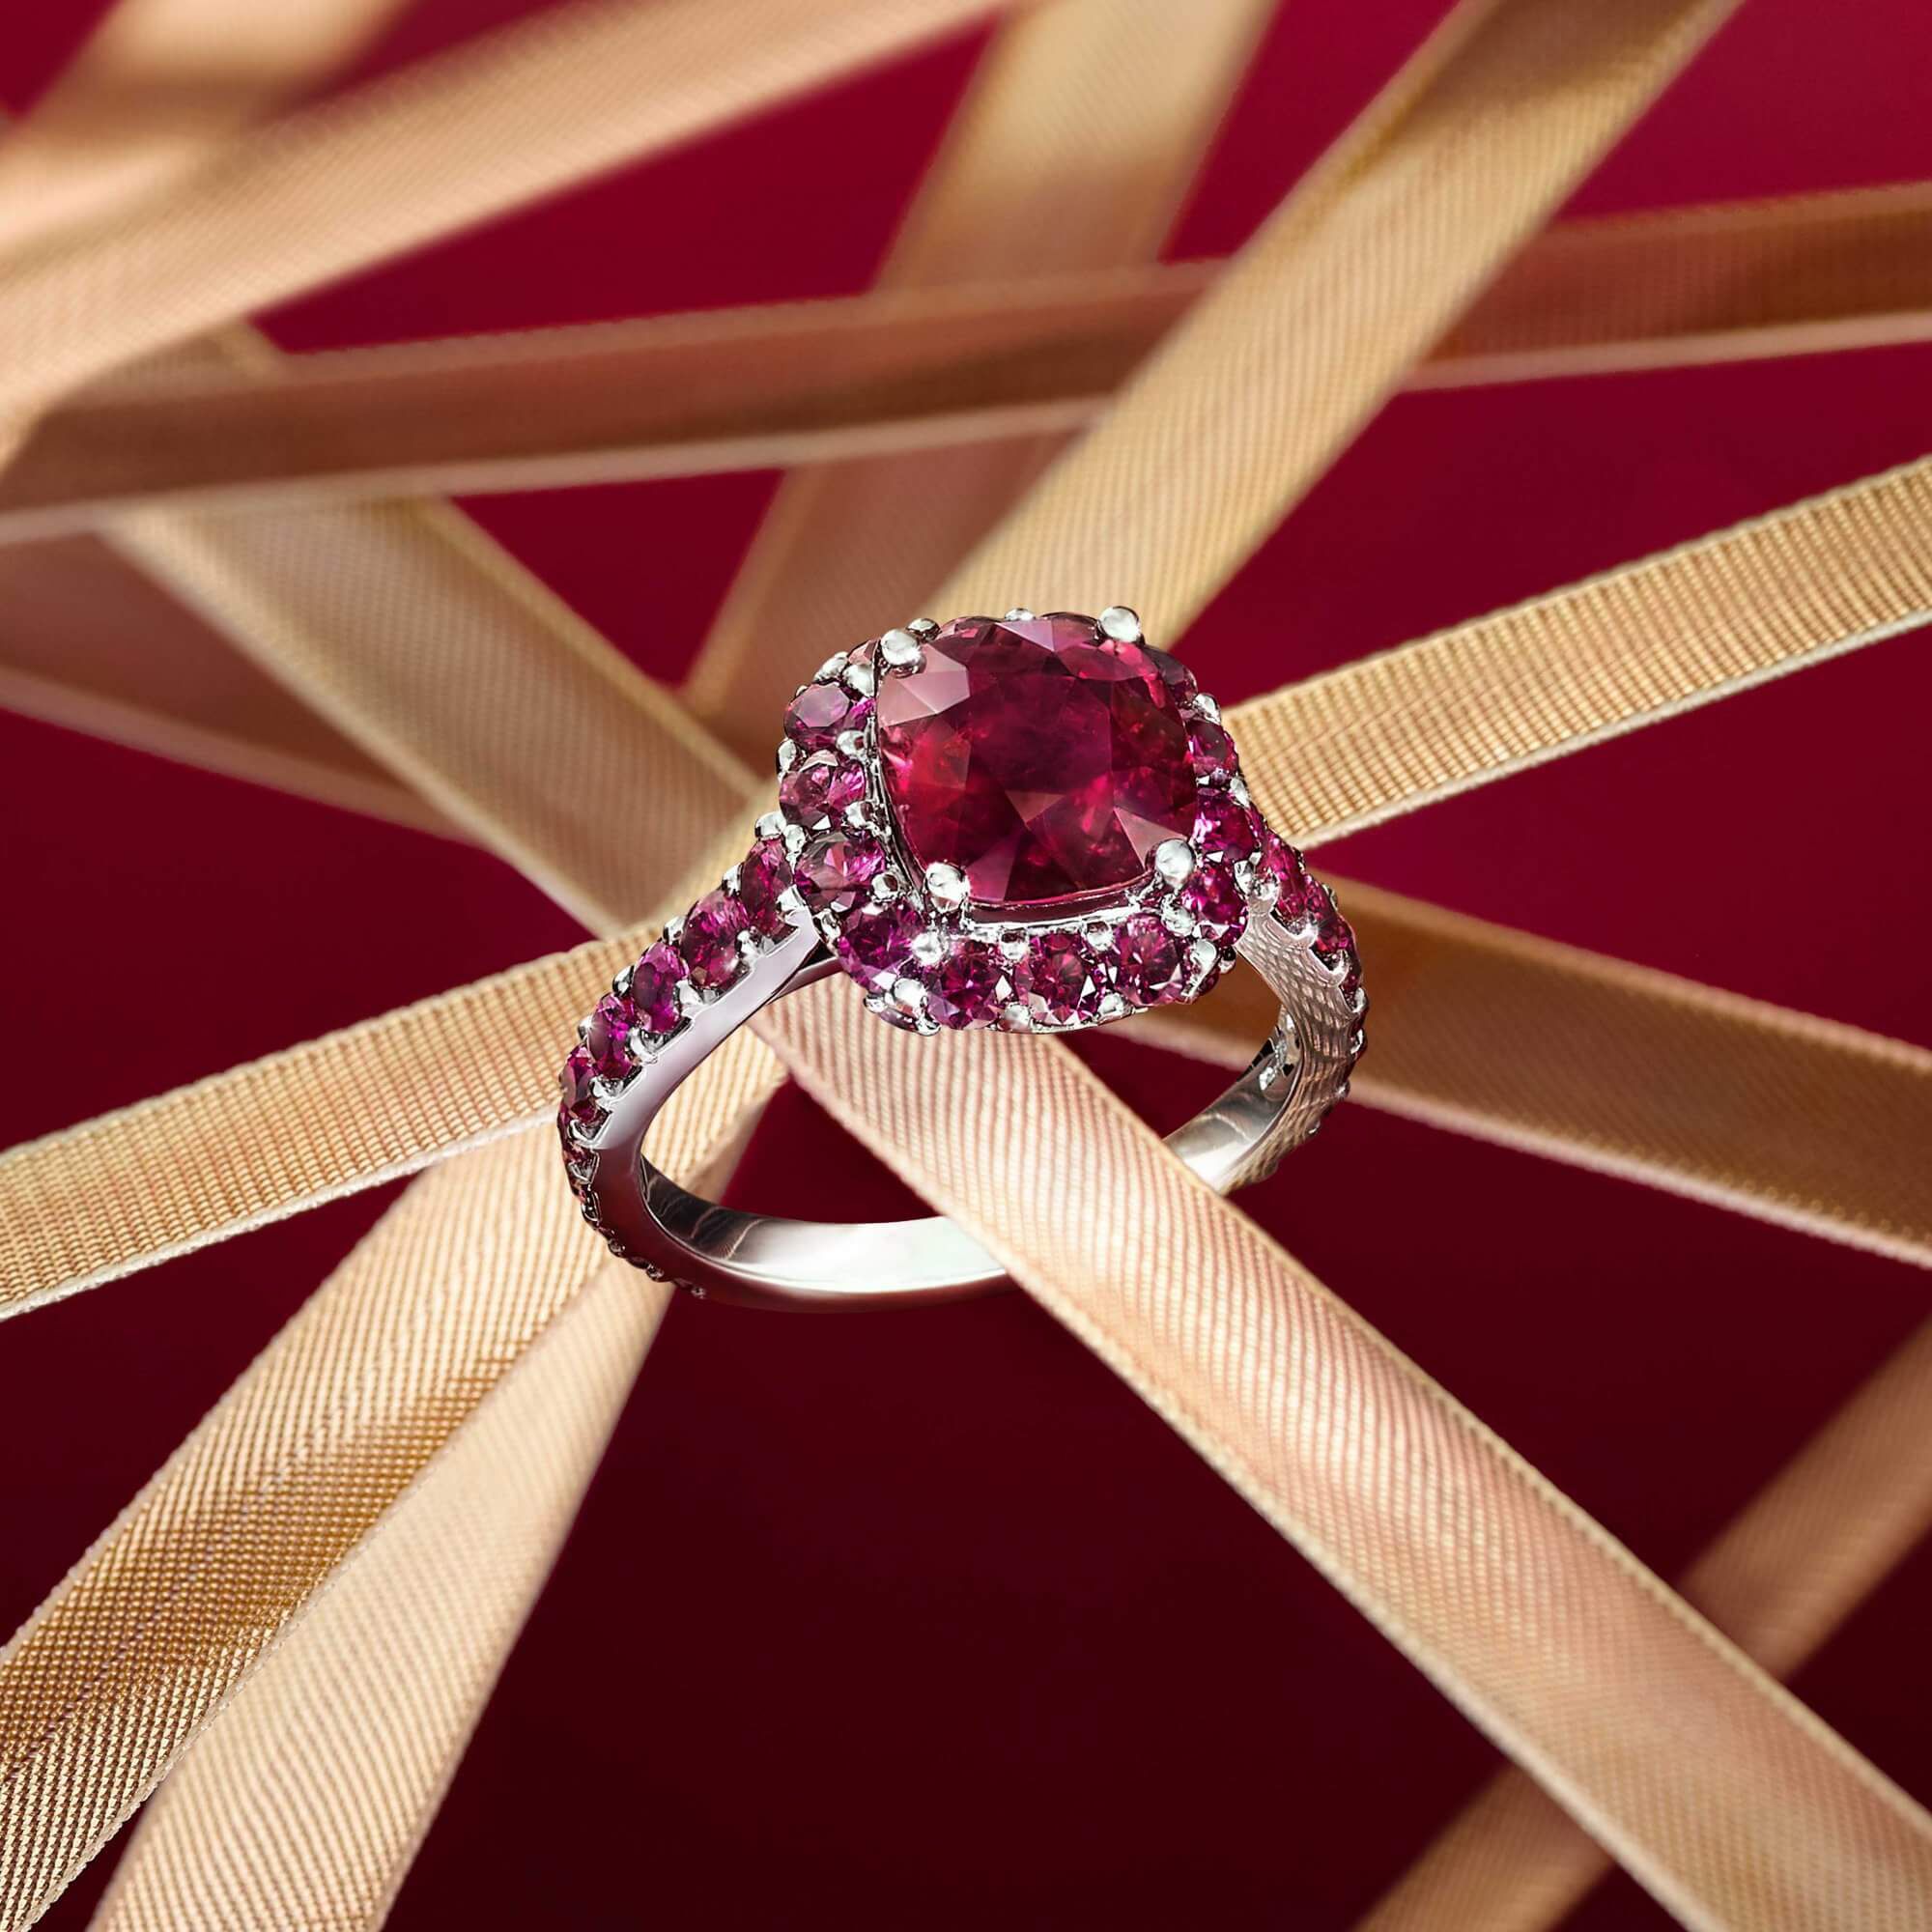 A Graff Ruby ring with gold ribbons on a red background